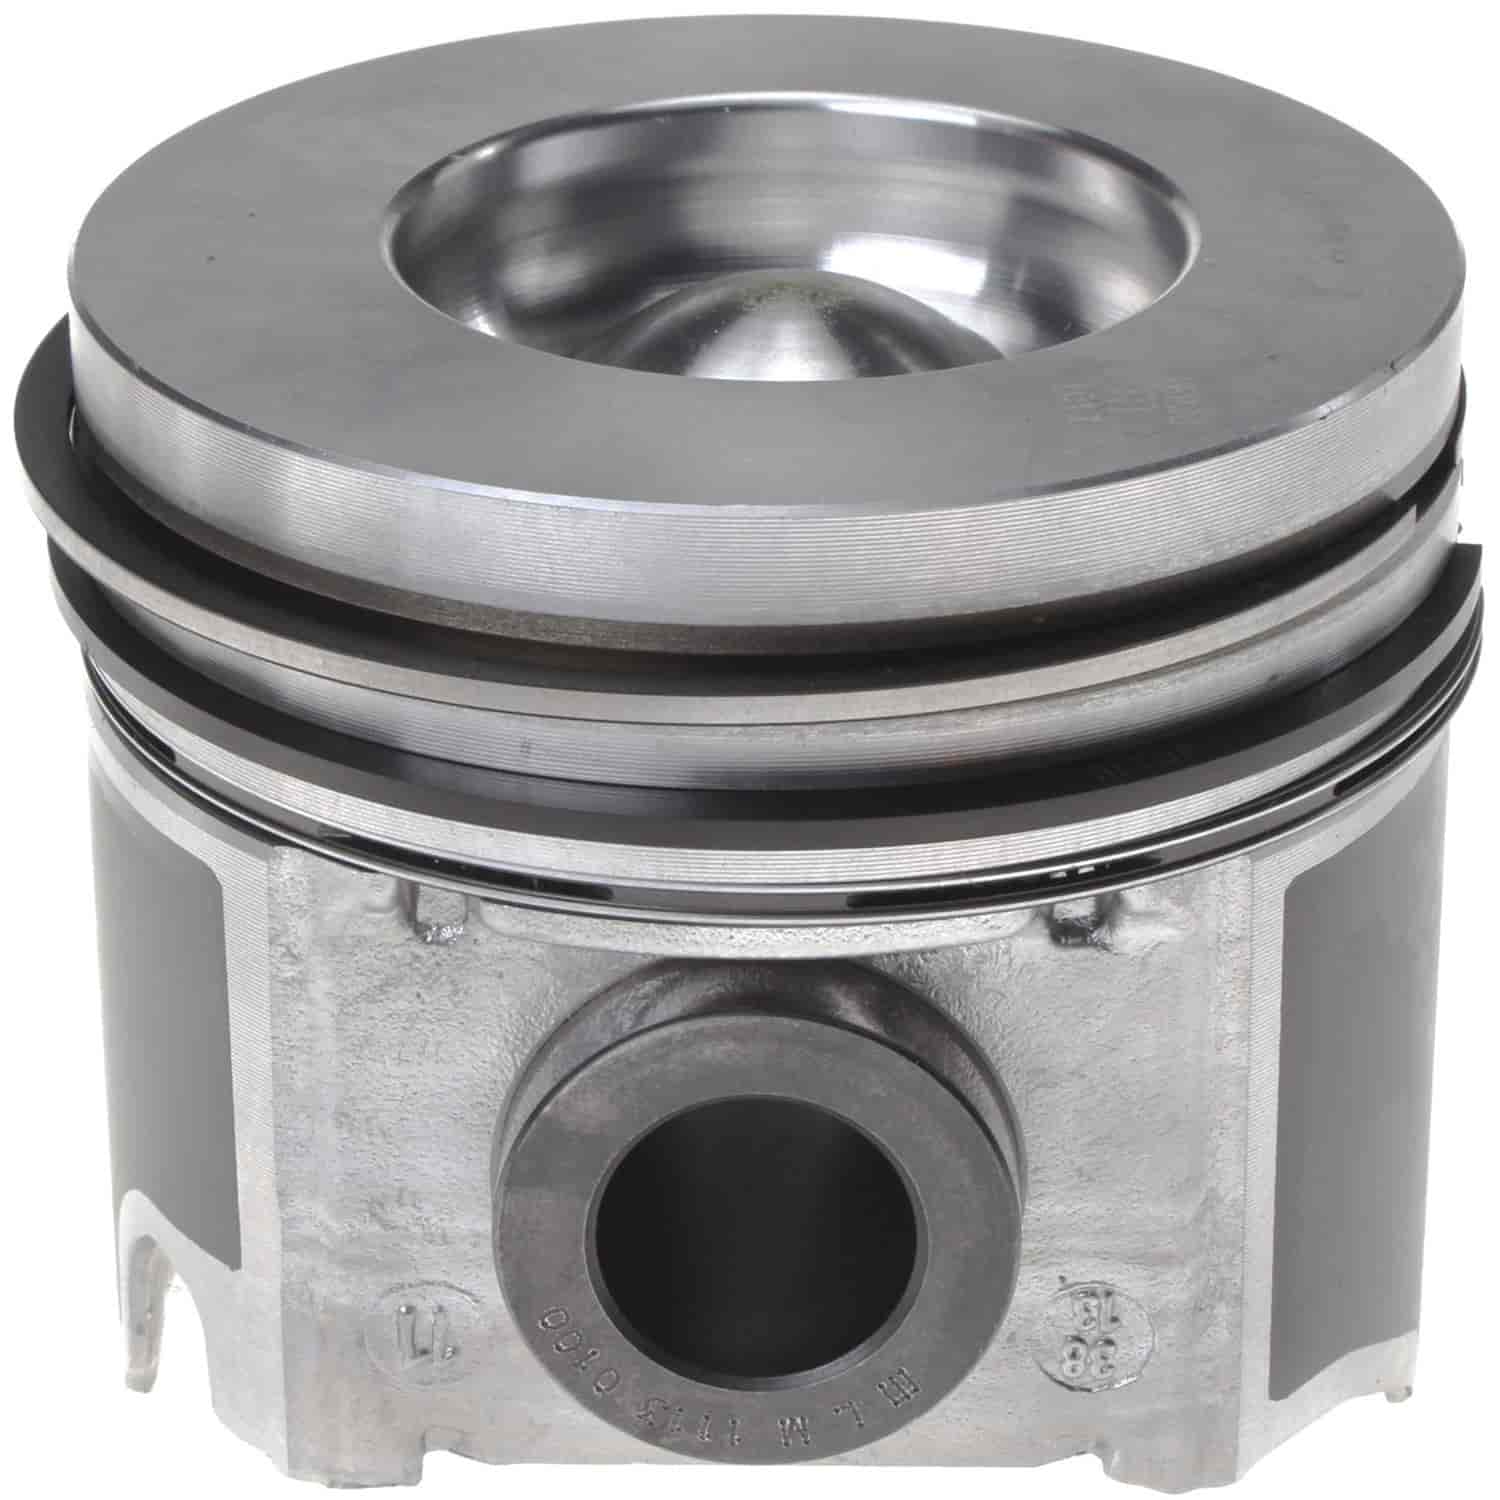 Piston and Rings Set 2003 Ford/Navistar Powerstroke Diesel V8 6.0L with 3.77" Bore (+.030")